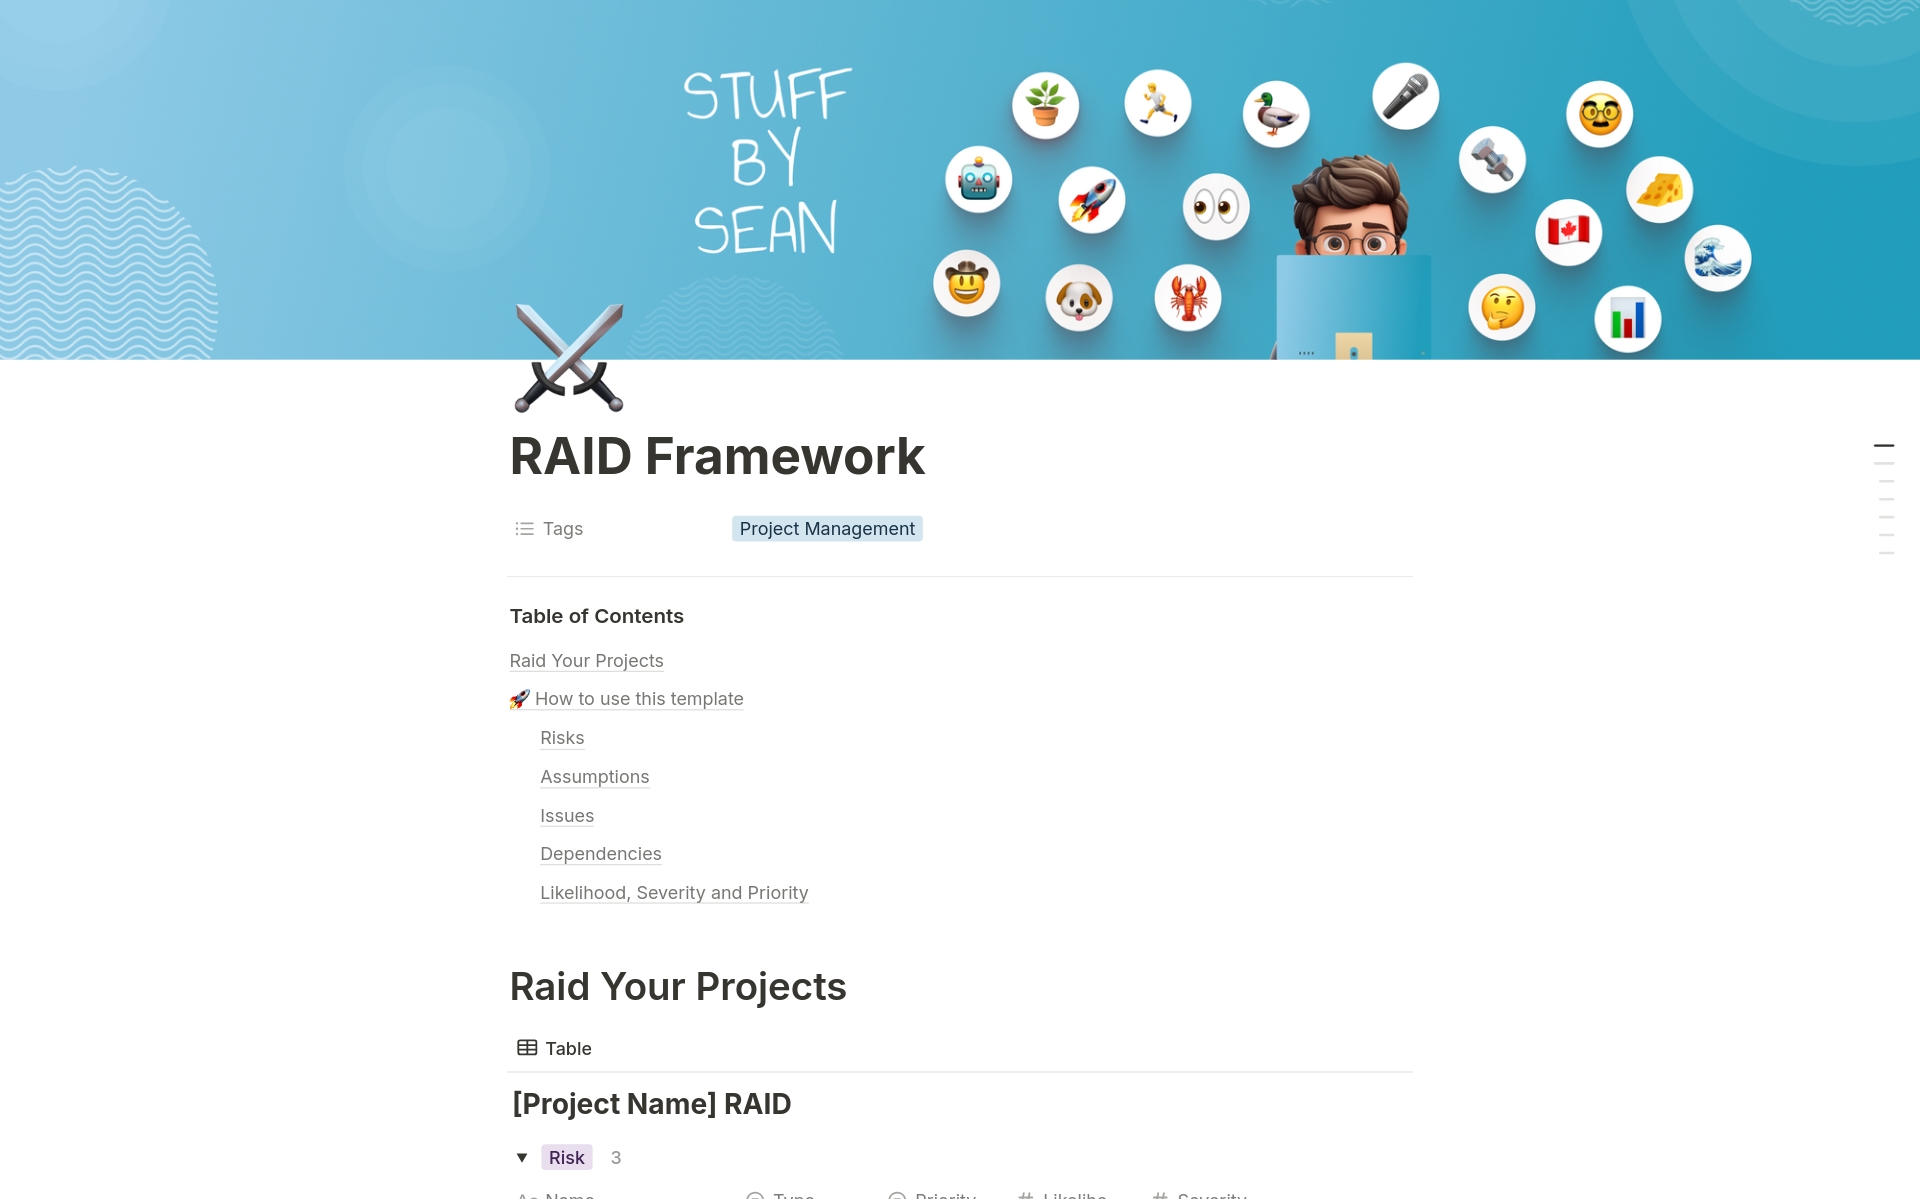 Master project management with a comprehensive RAID framework! Identify risks, assumptions, issues, and dependencies to streamline project execution and enhance strategic planning.